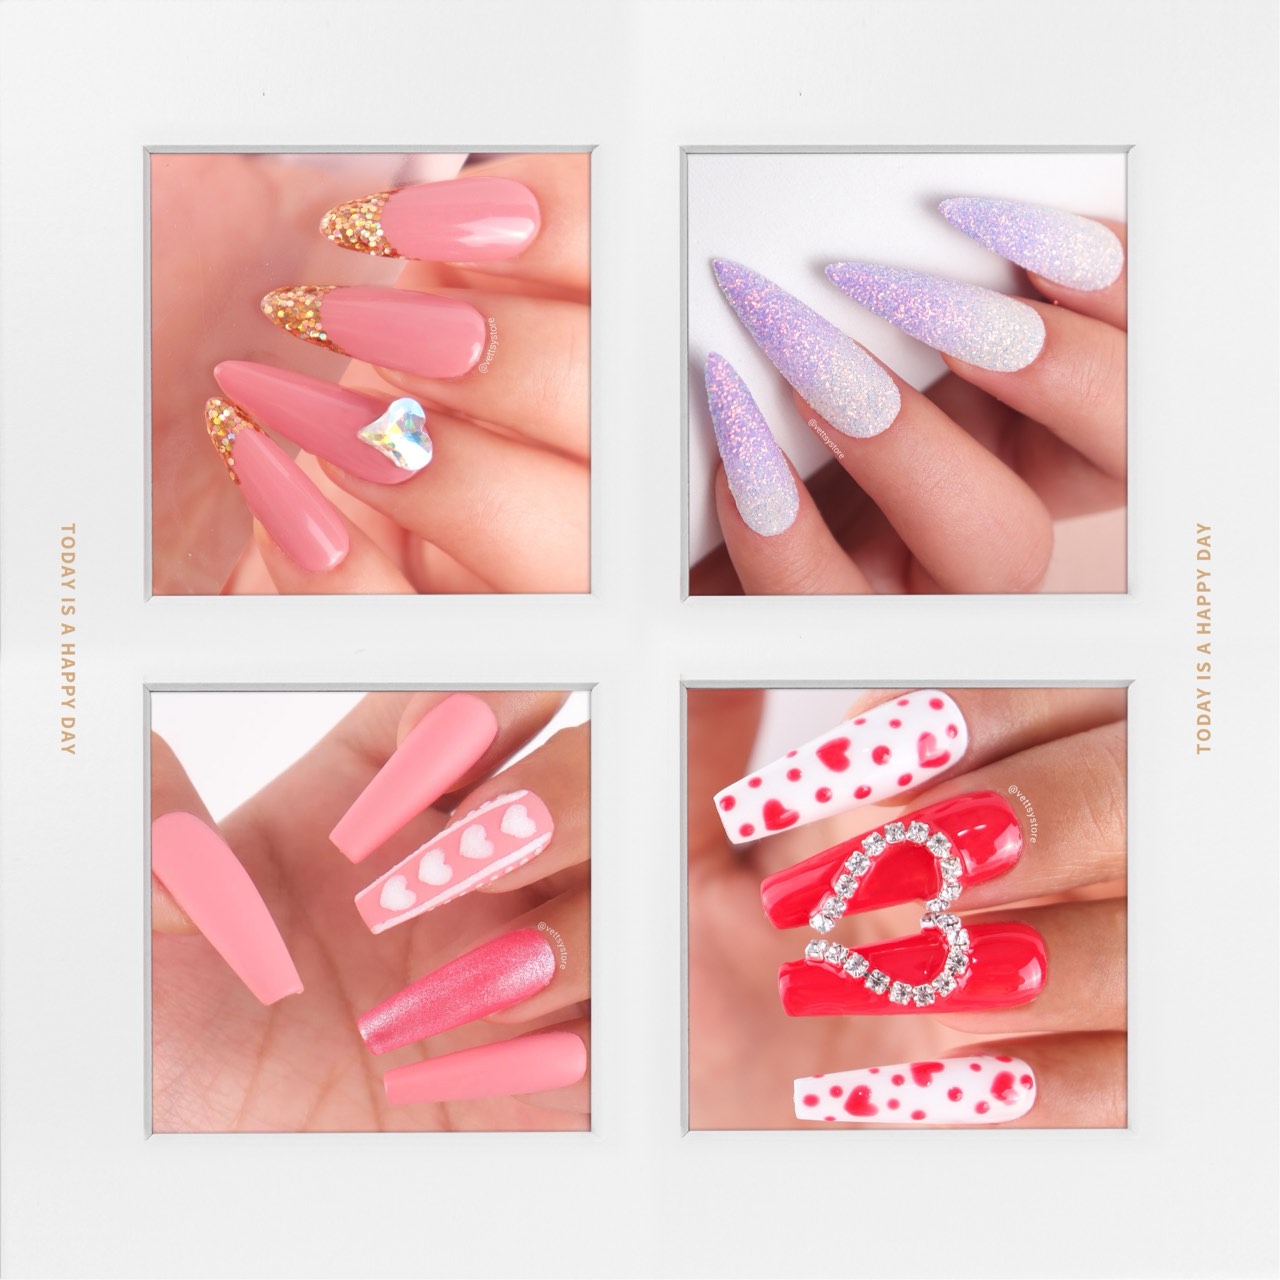 11 Remarkable and Seductive Valentine’s Day Nail Designs in 2022